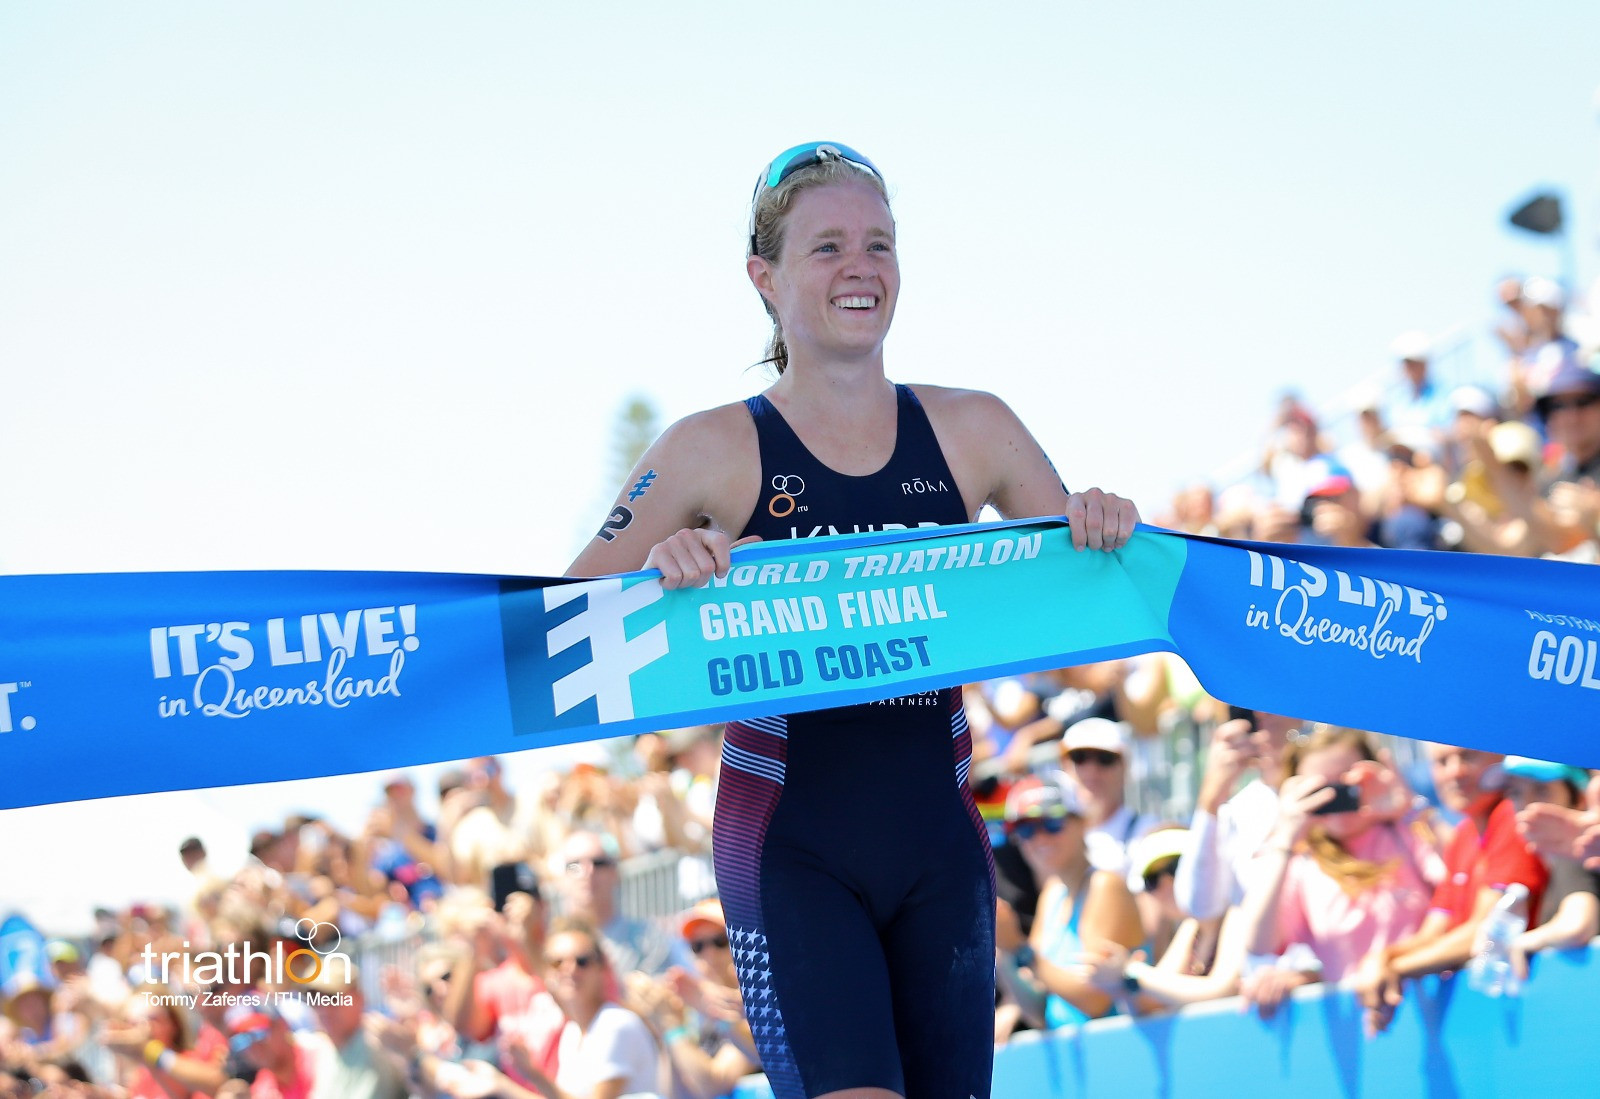 Reid and Knibb win ITU under-23 world titles at Grand Final in Gold Coast